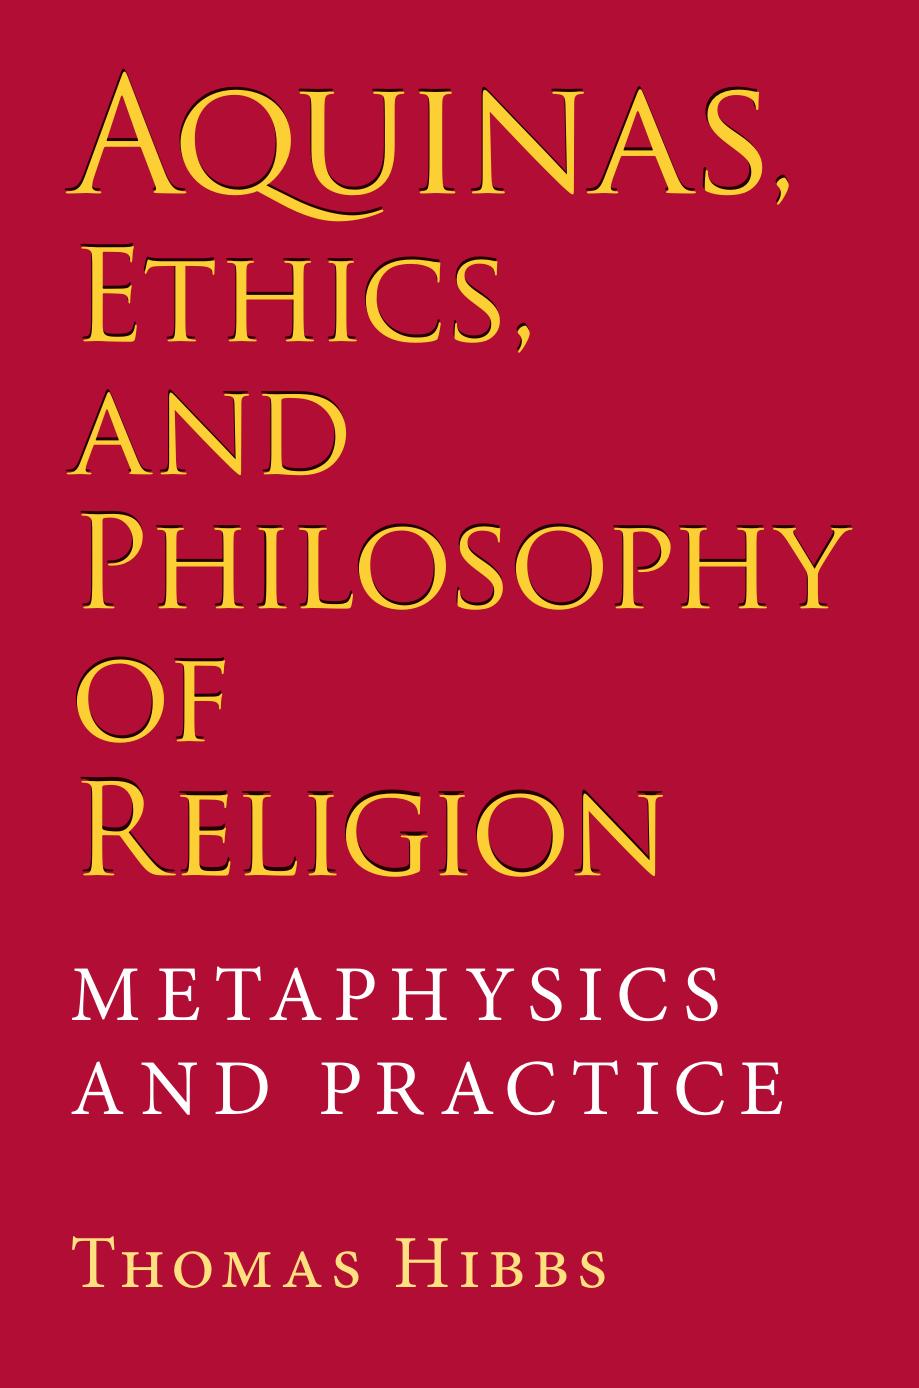 Aquinas, Ethics, and Philosophy of Religion: Metaphysics and Practice